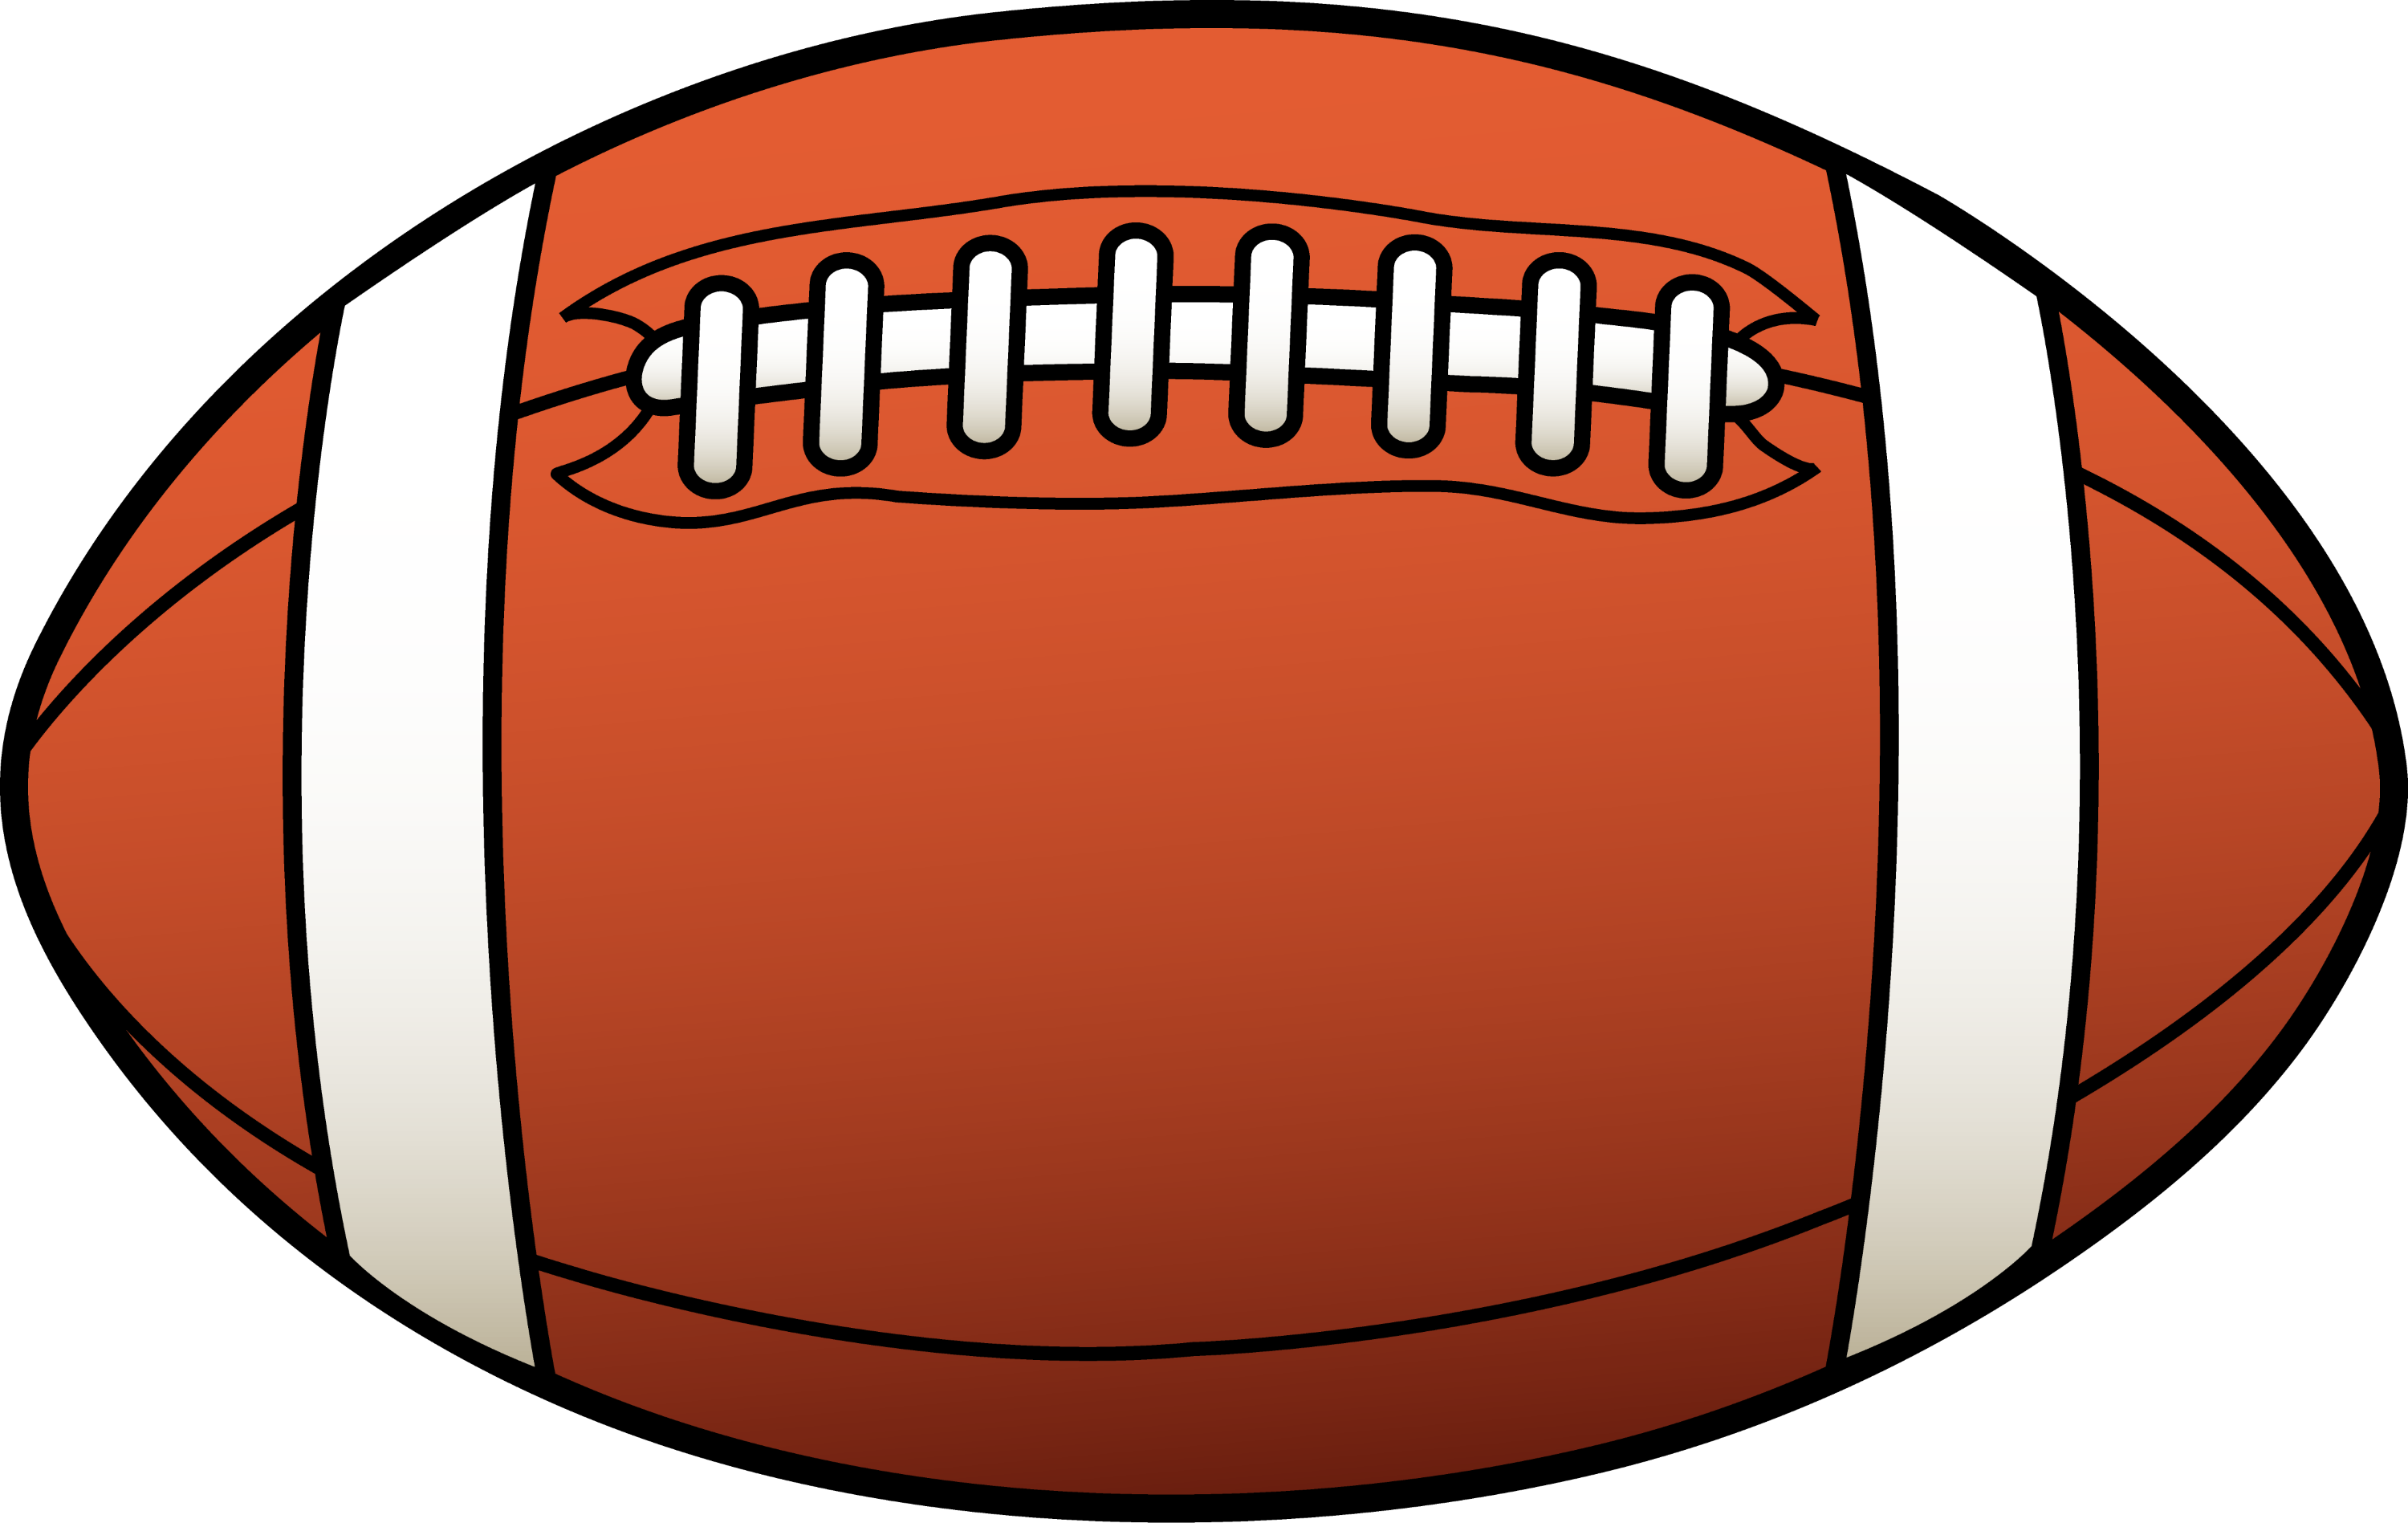 Rugby Ball or American Football - Free Clip Art